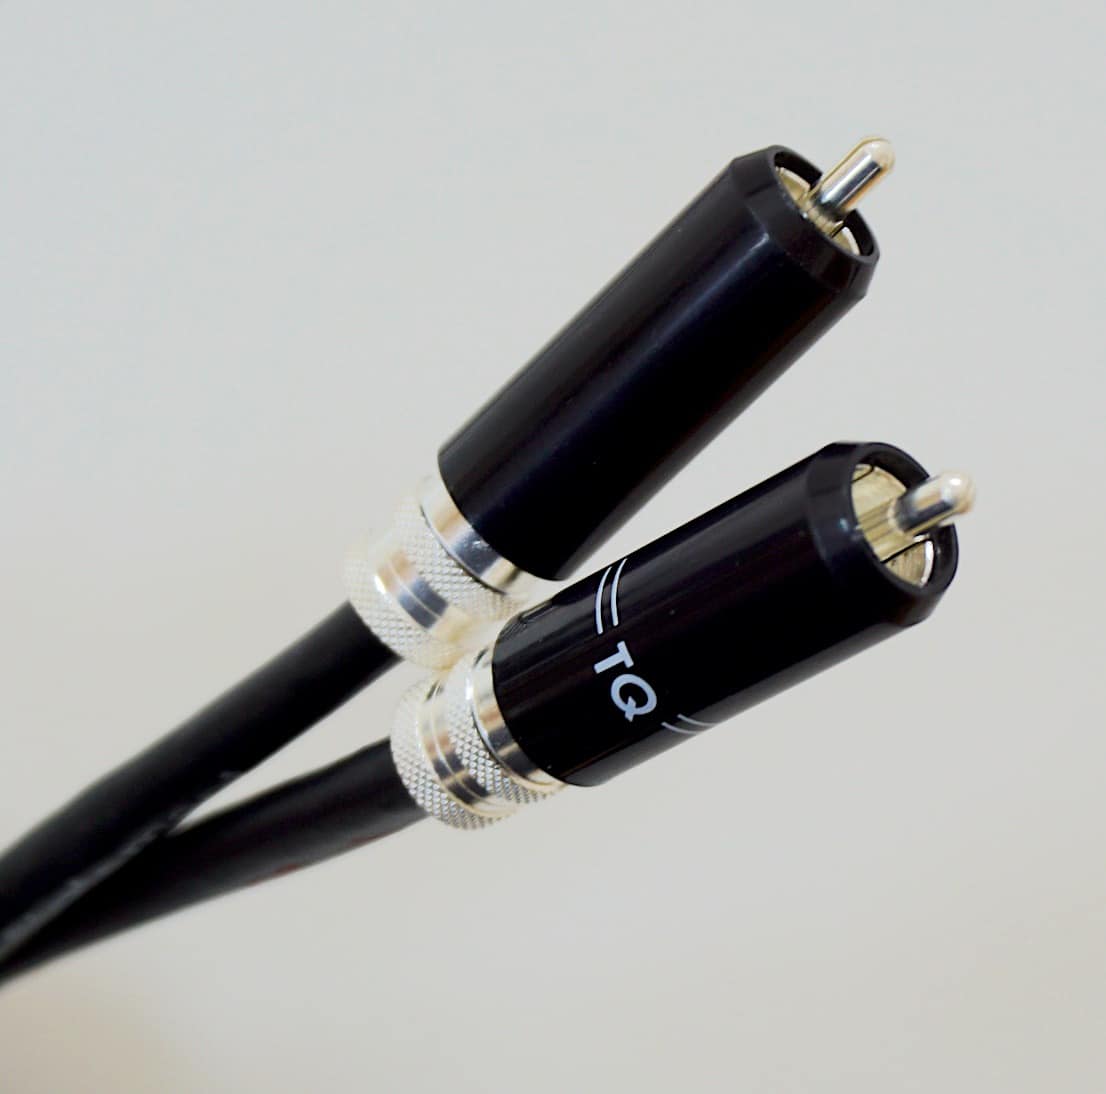 DIN TO PHONO RCA STATEMENT CABLE